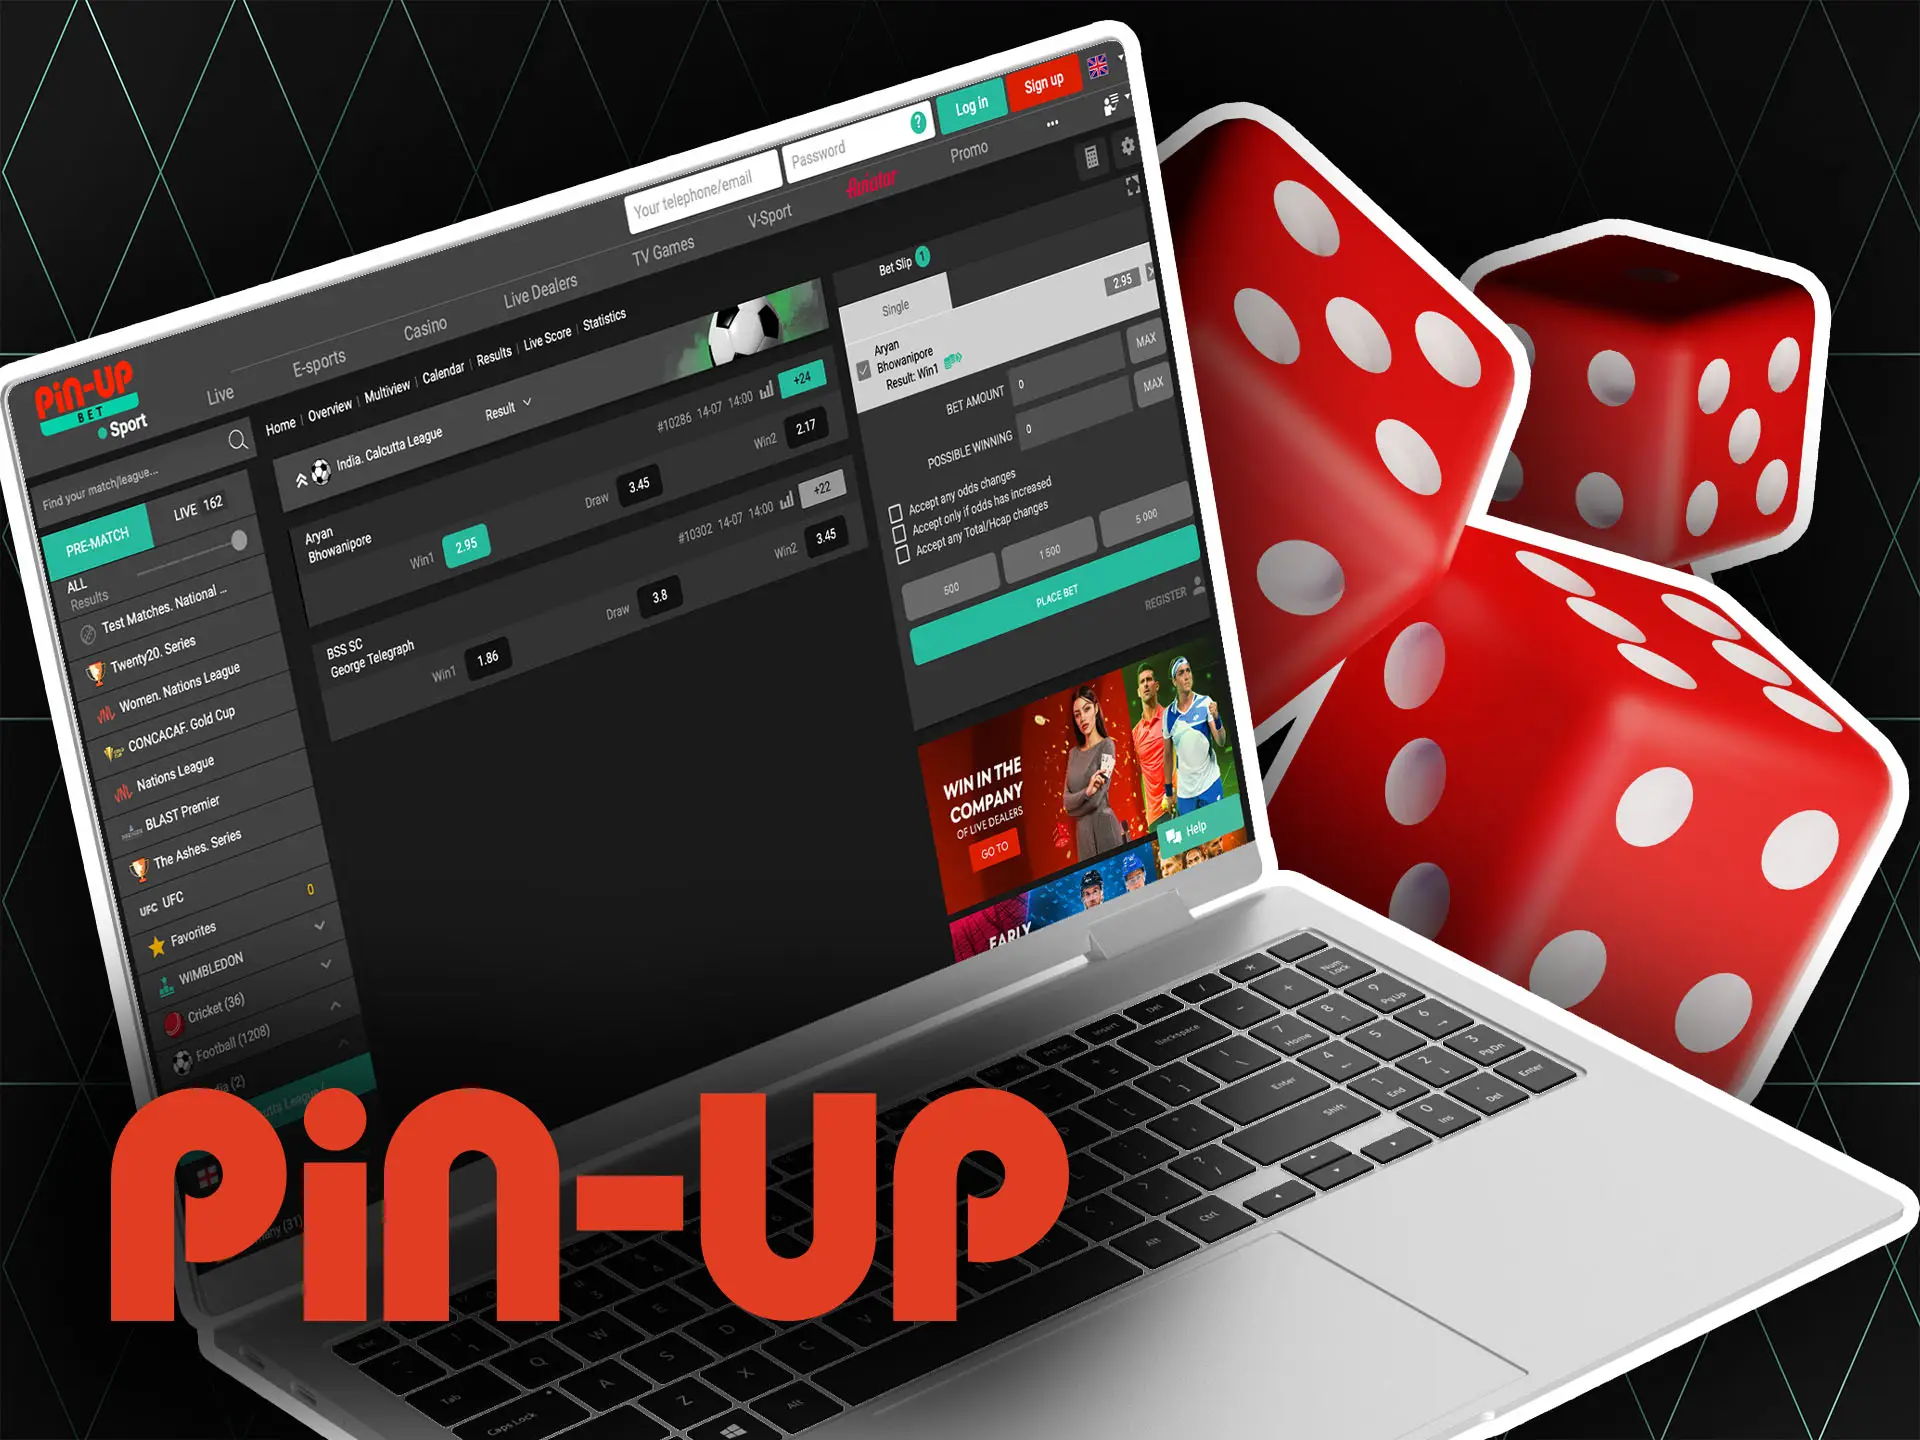 Log in to your Pin Up account, choose a sports event and place a bet on your favorite player or team.